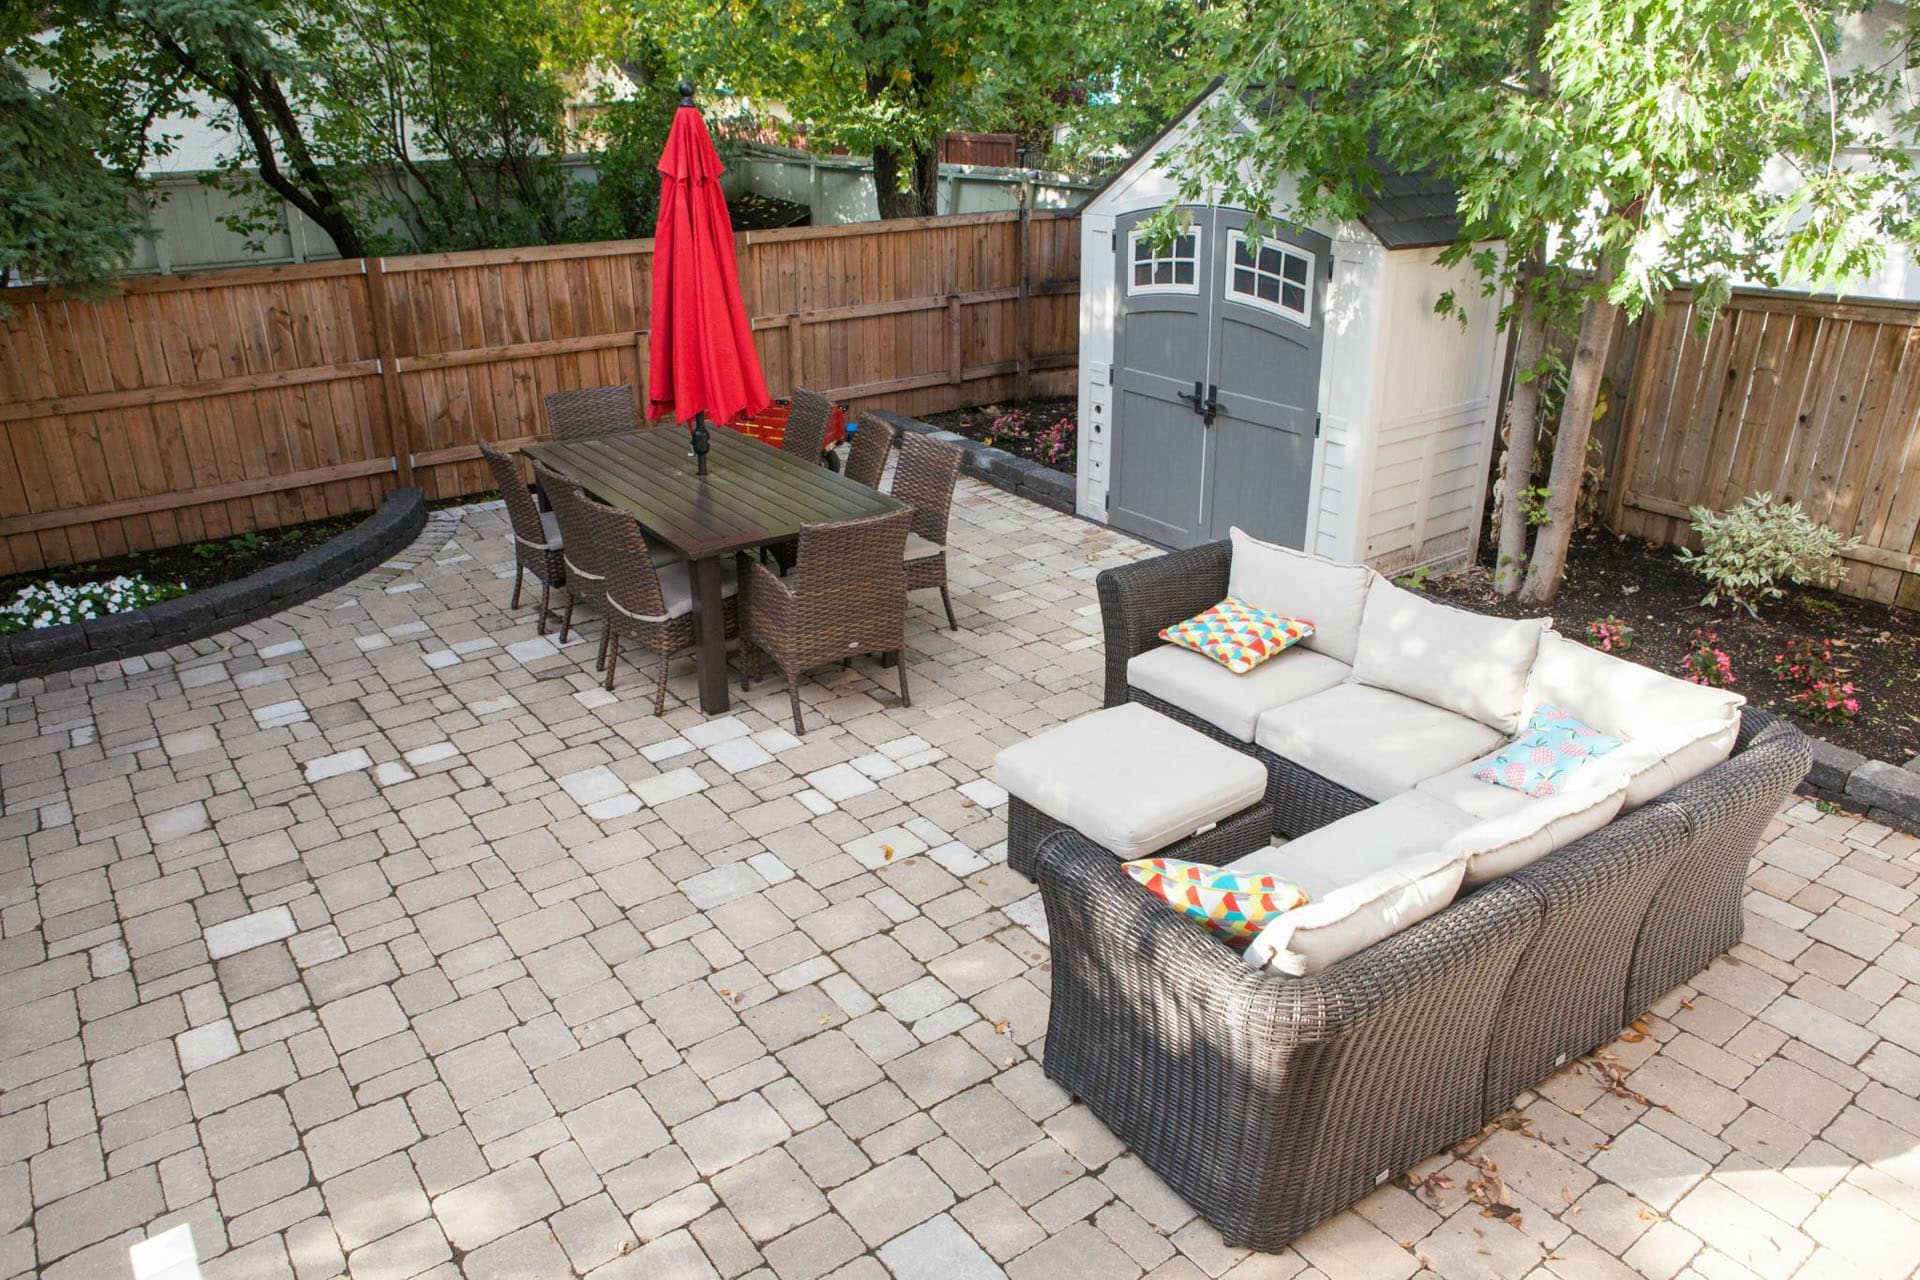 Brick patio and planting beds with outdoor furniture.